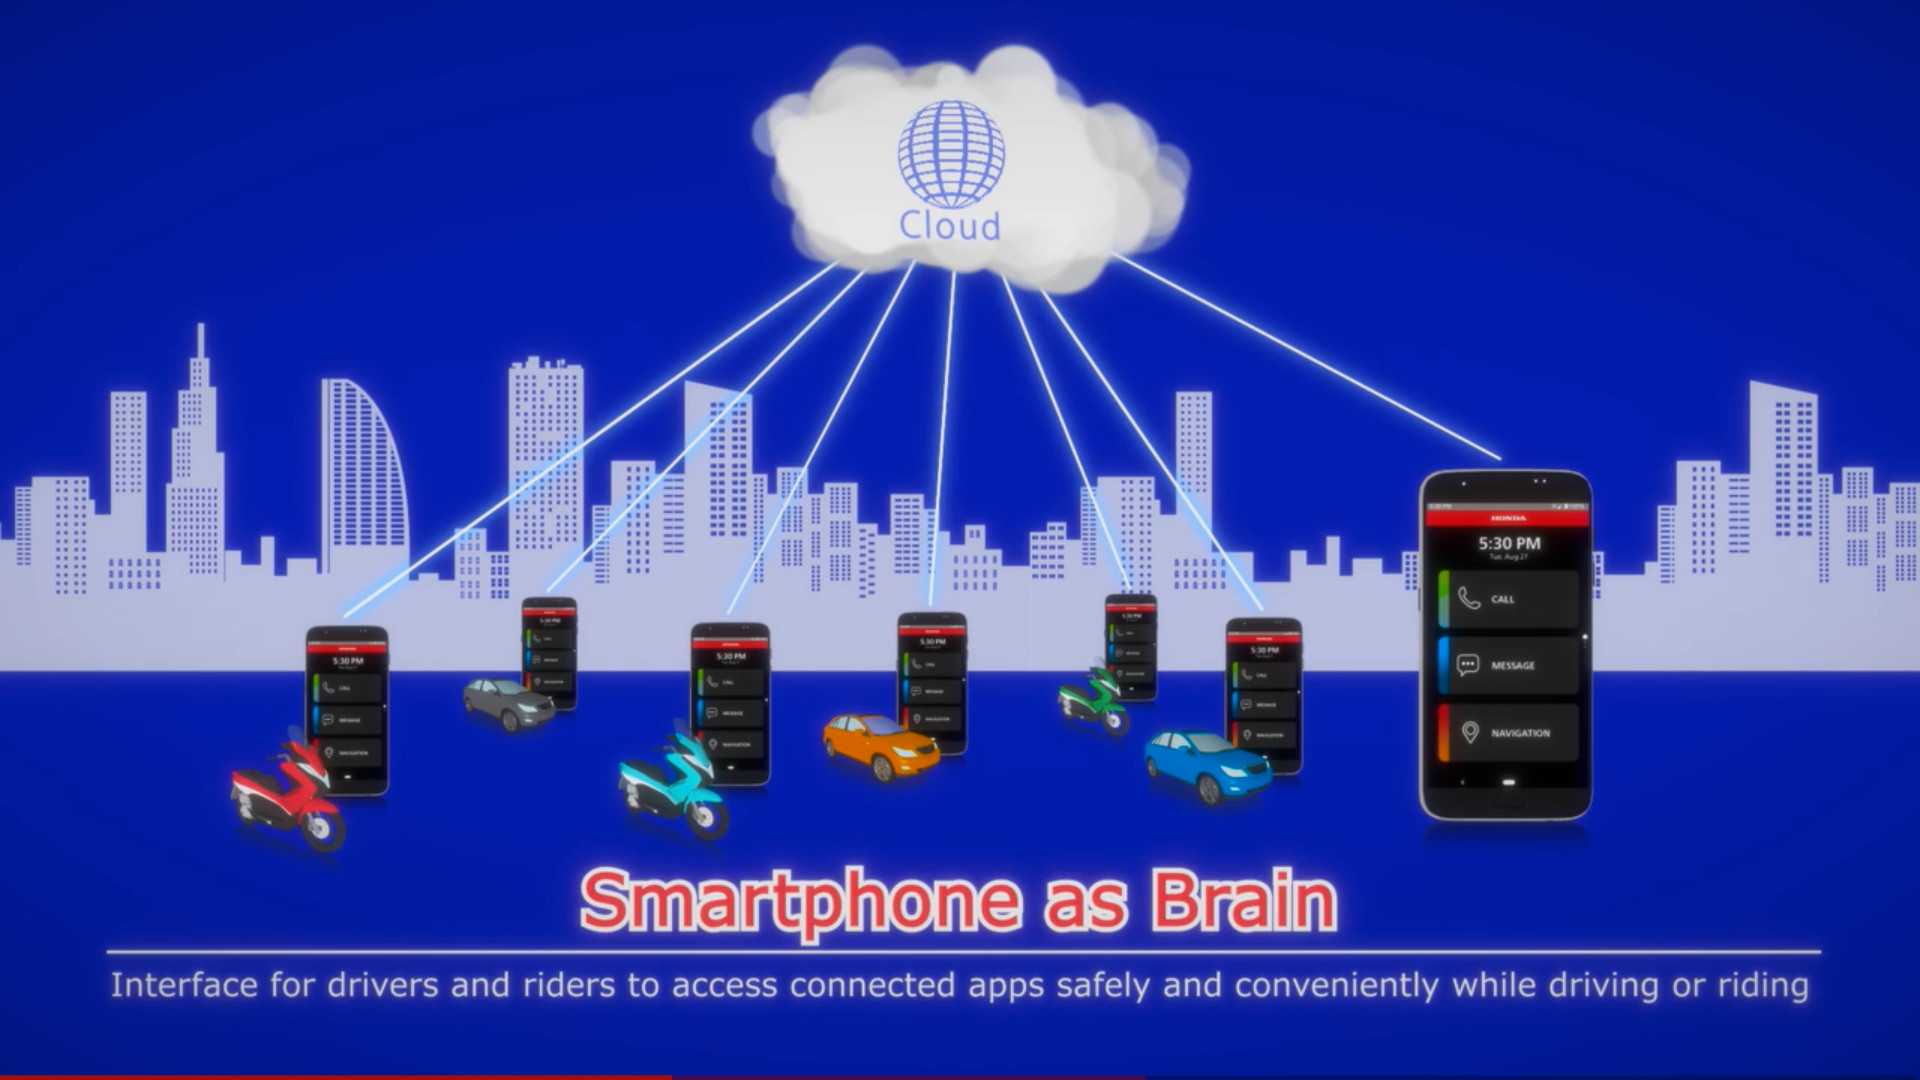 Honda Smartphone as Brain
- also in the app Motorcycle News